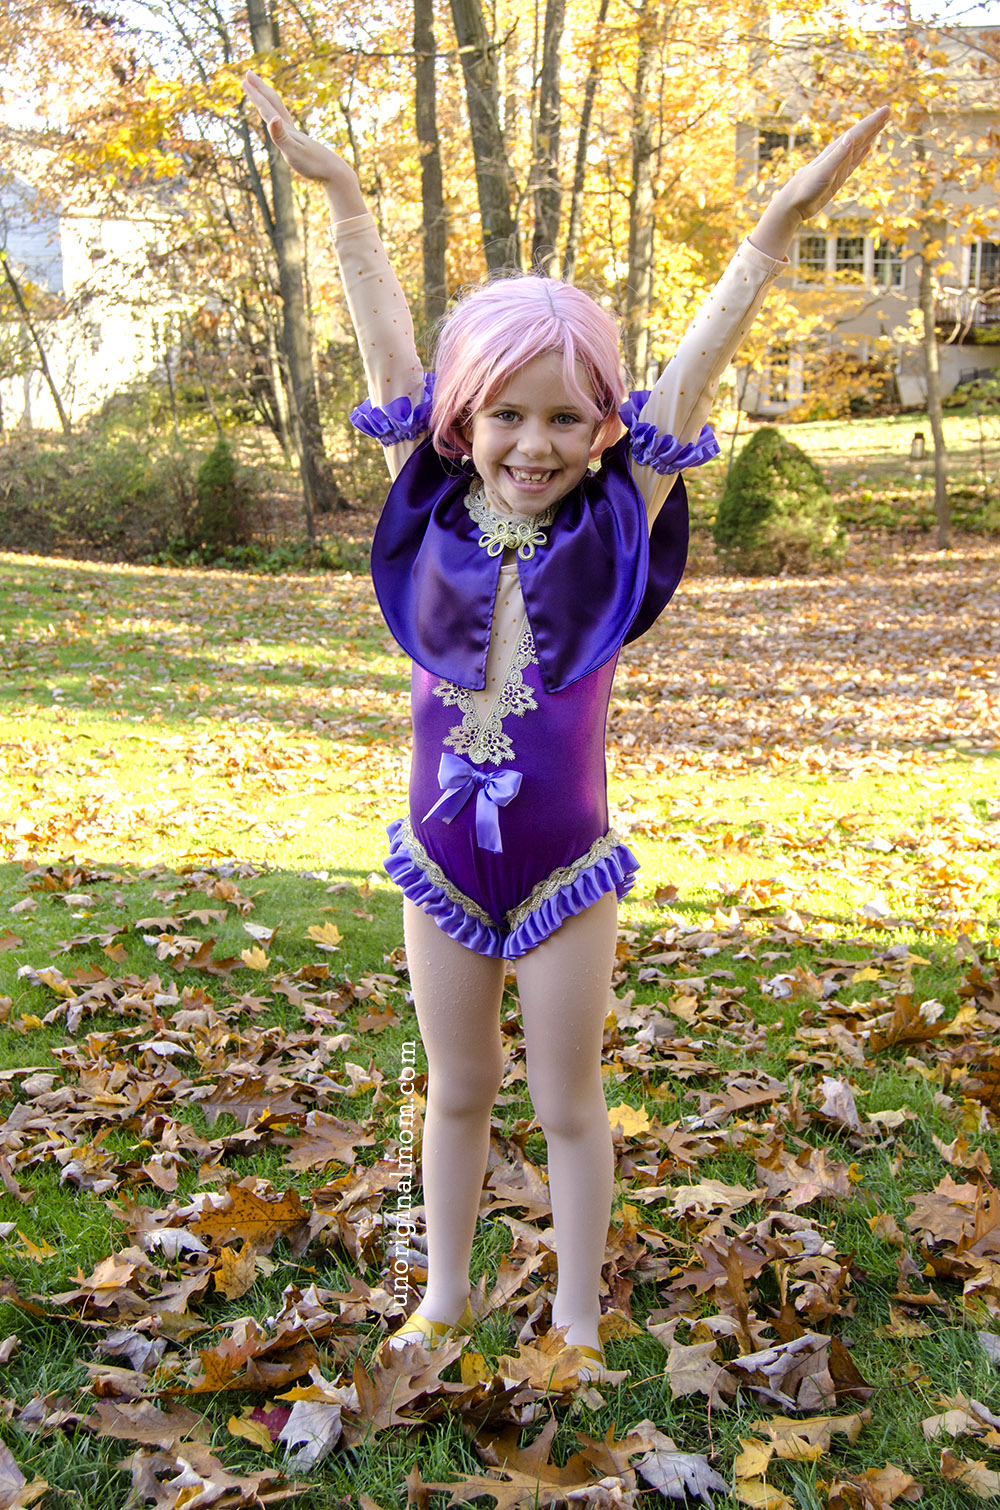 DIY Greatest Showman costumes: Get all the details on this DIY Anne Wheeler costume, made out of a store bought leotard.